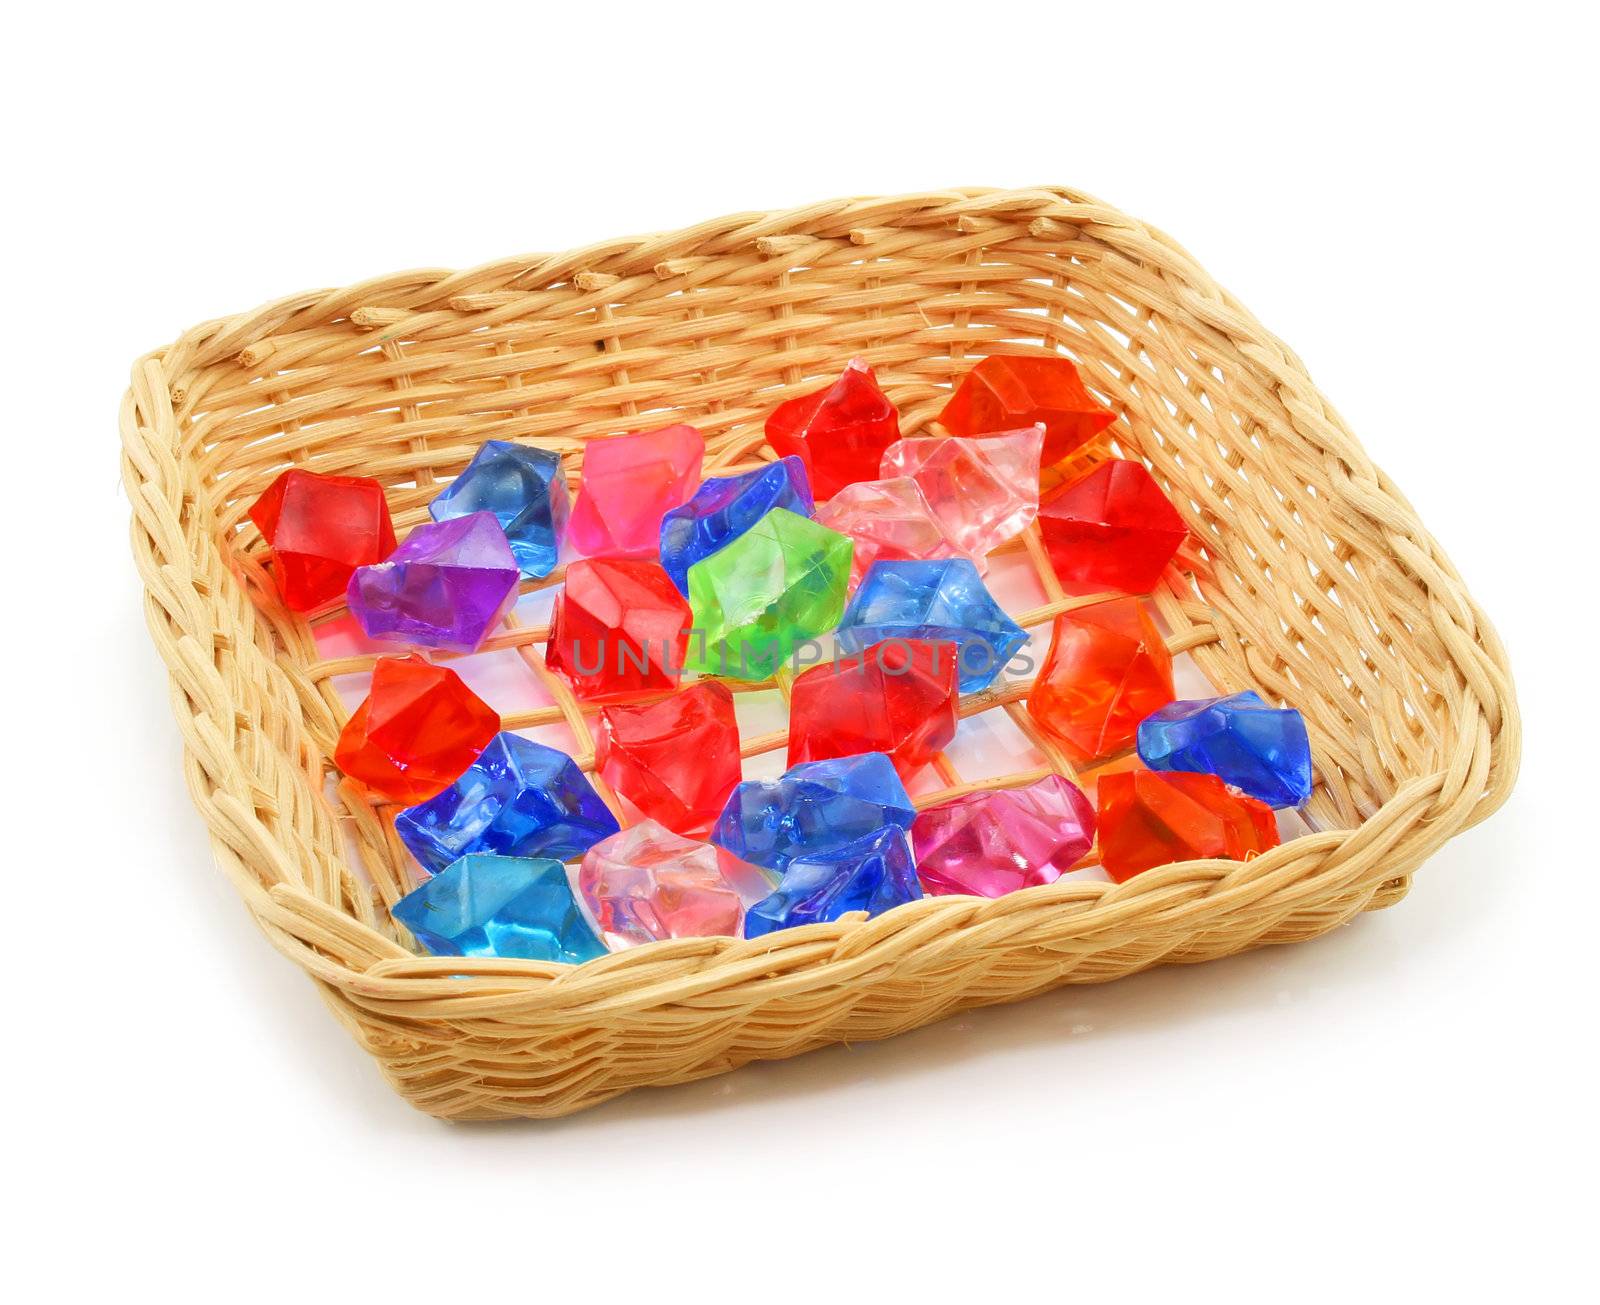 Colored assorted gemstones in wooden basket isolated on a white background